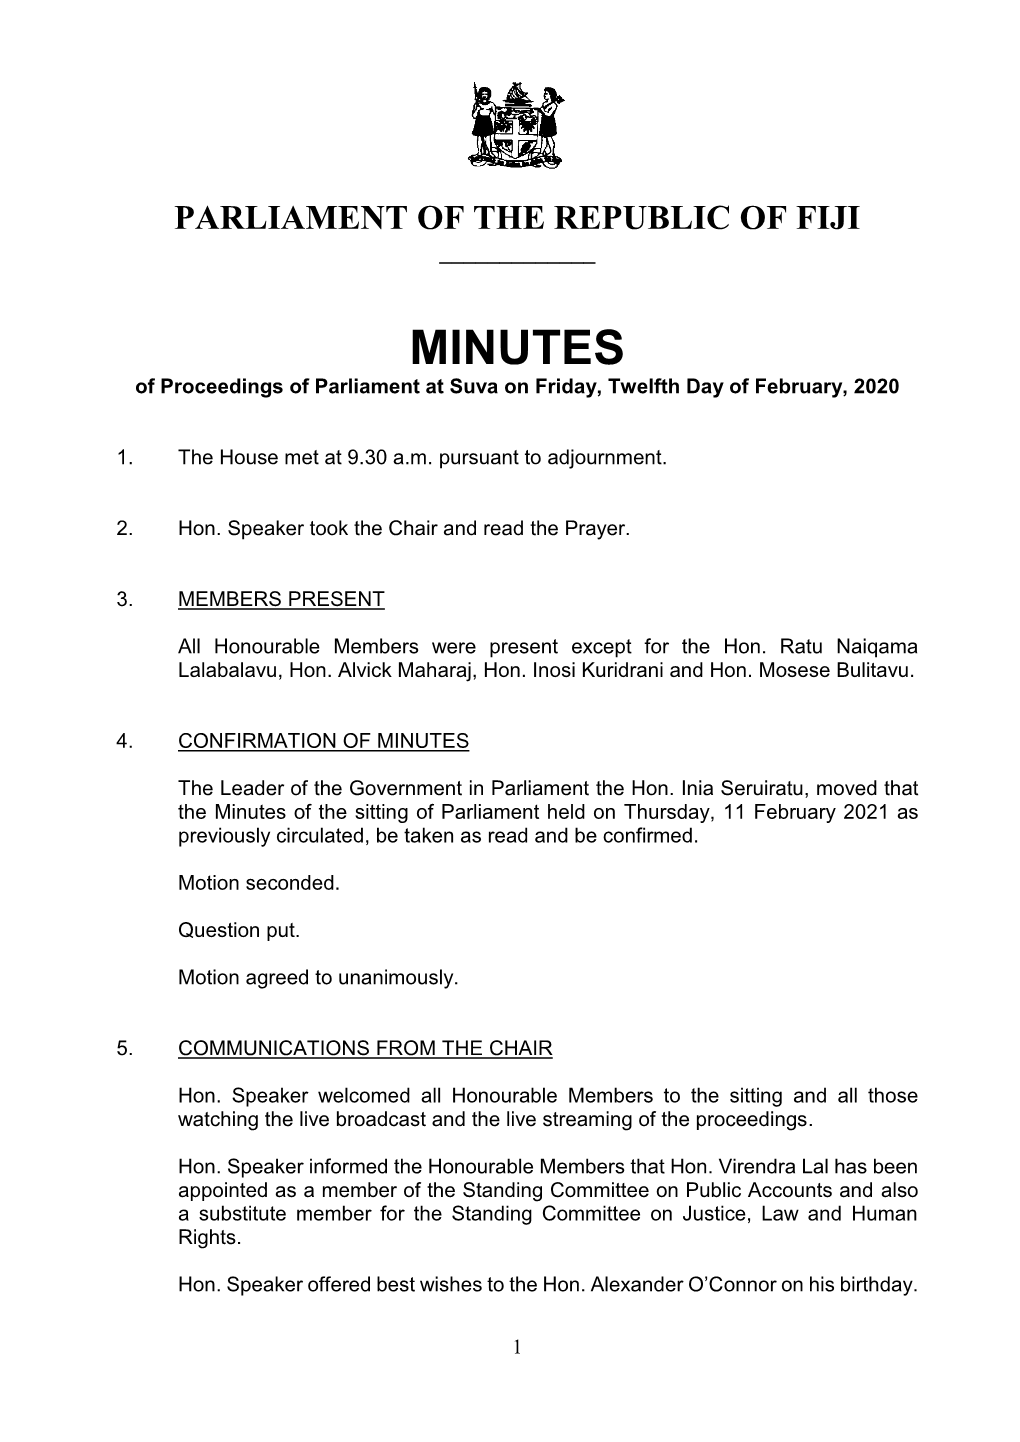 MINUTES of Proceedings of Parliament at Suva on Friday, Twelfth Day of February, 2020